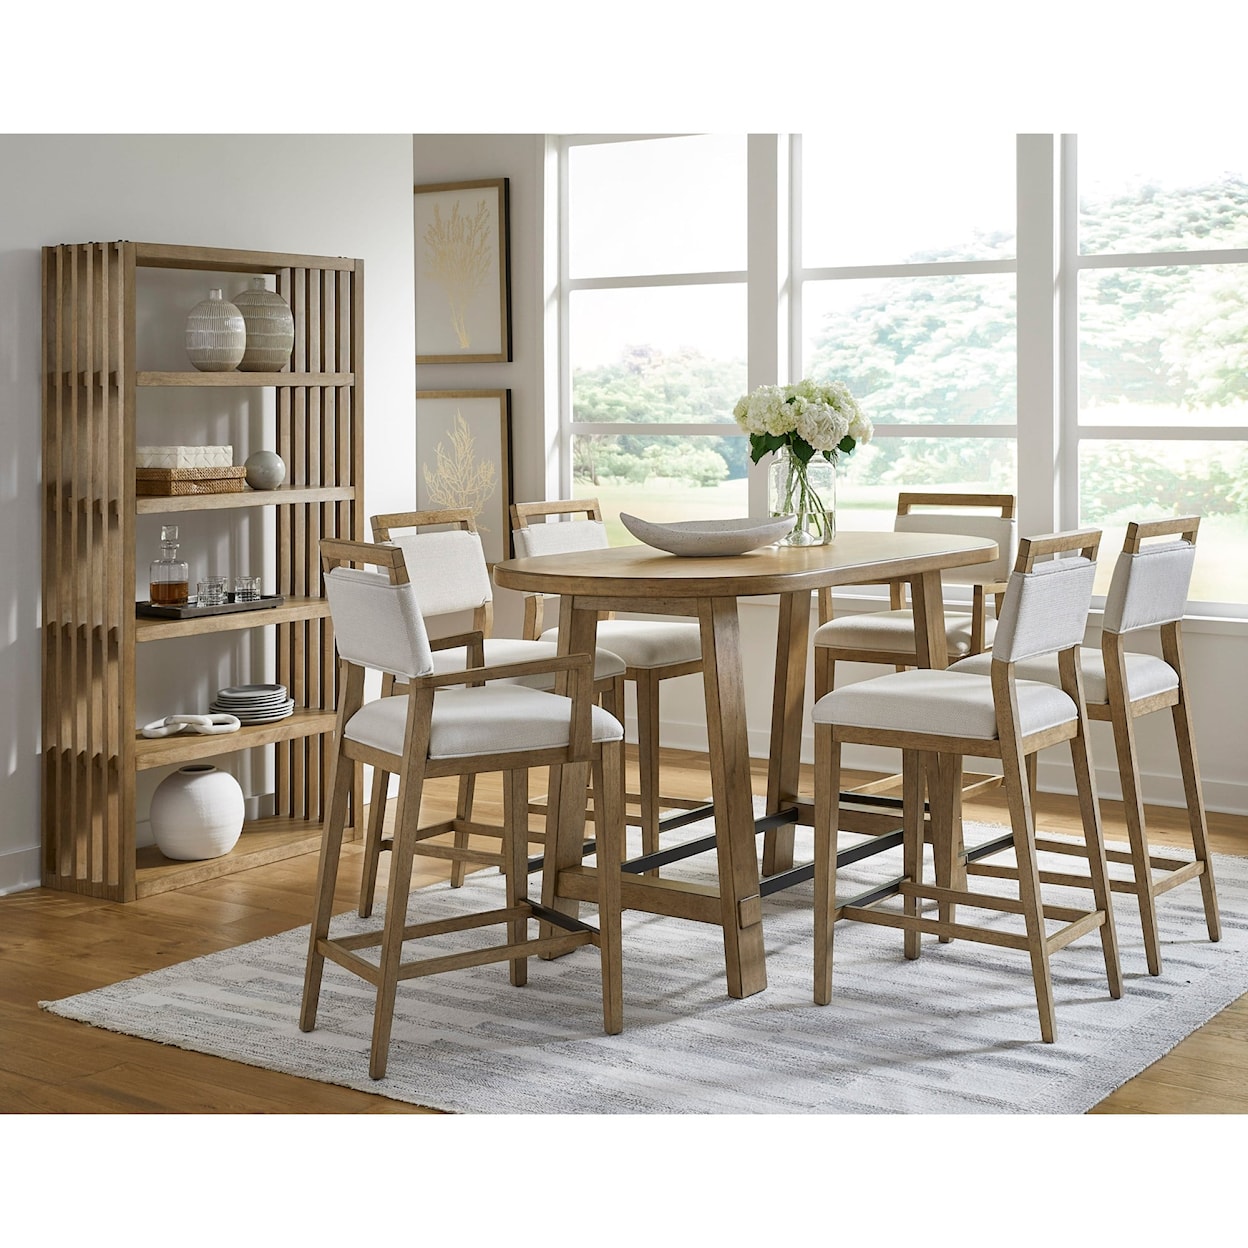 Drew & Jonathan Home Catalina Counter Height Trestle Table with 4 Chairs